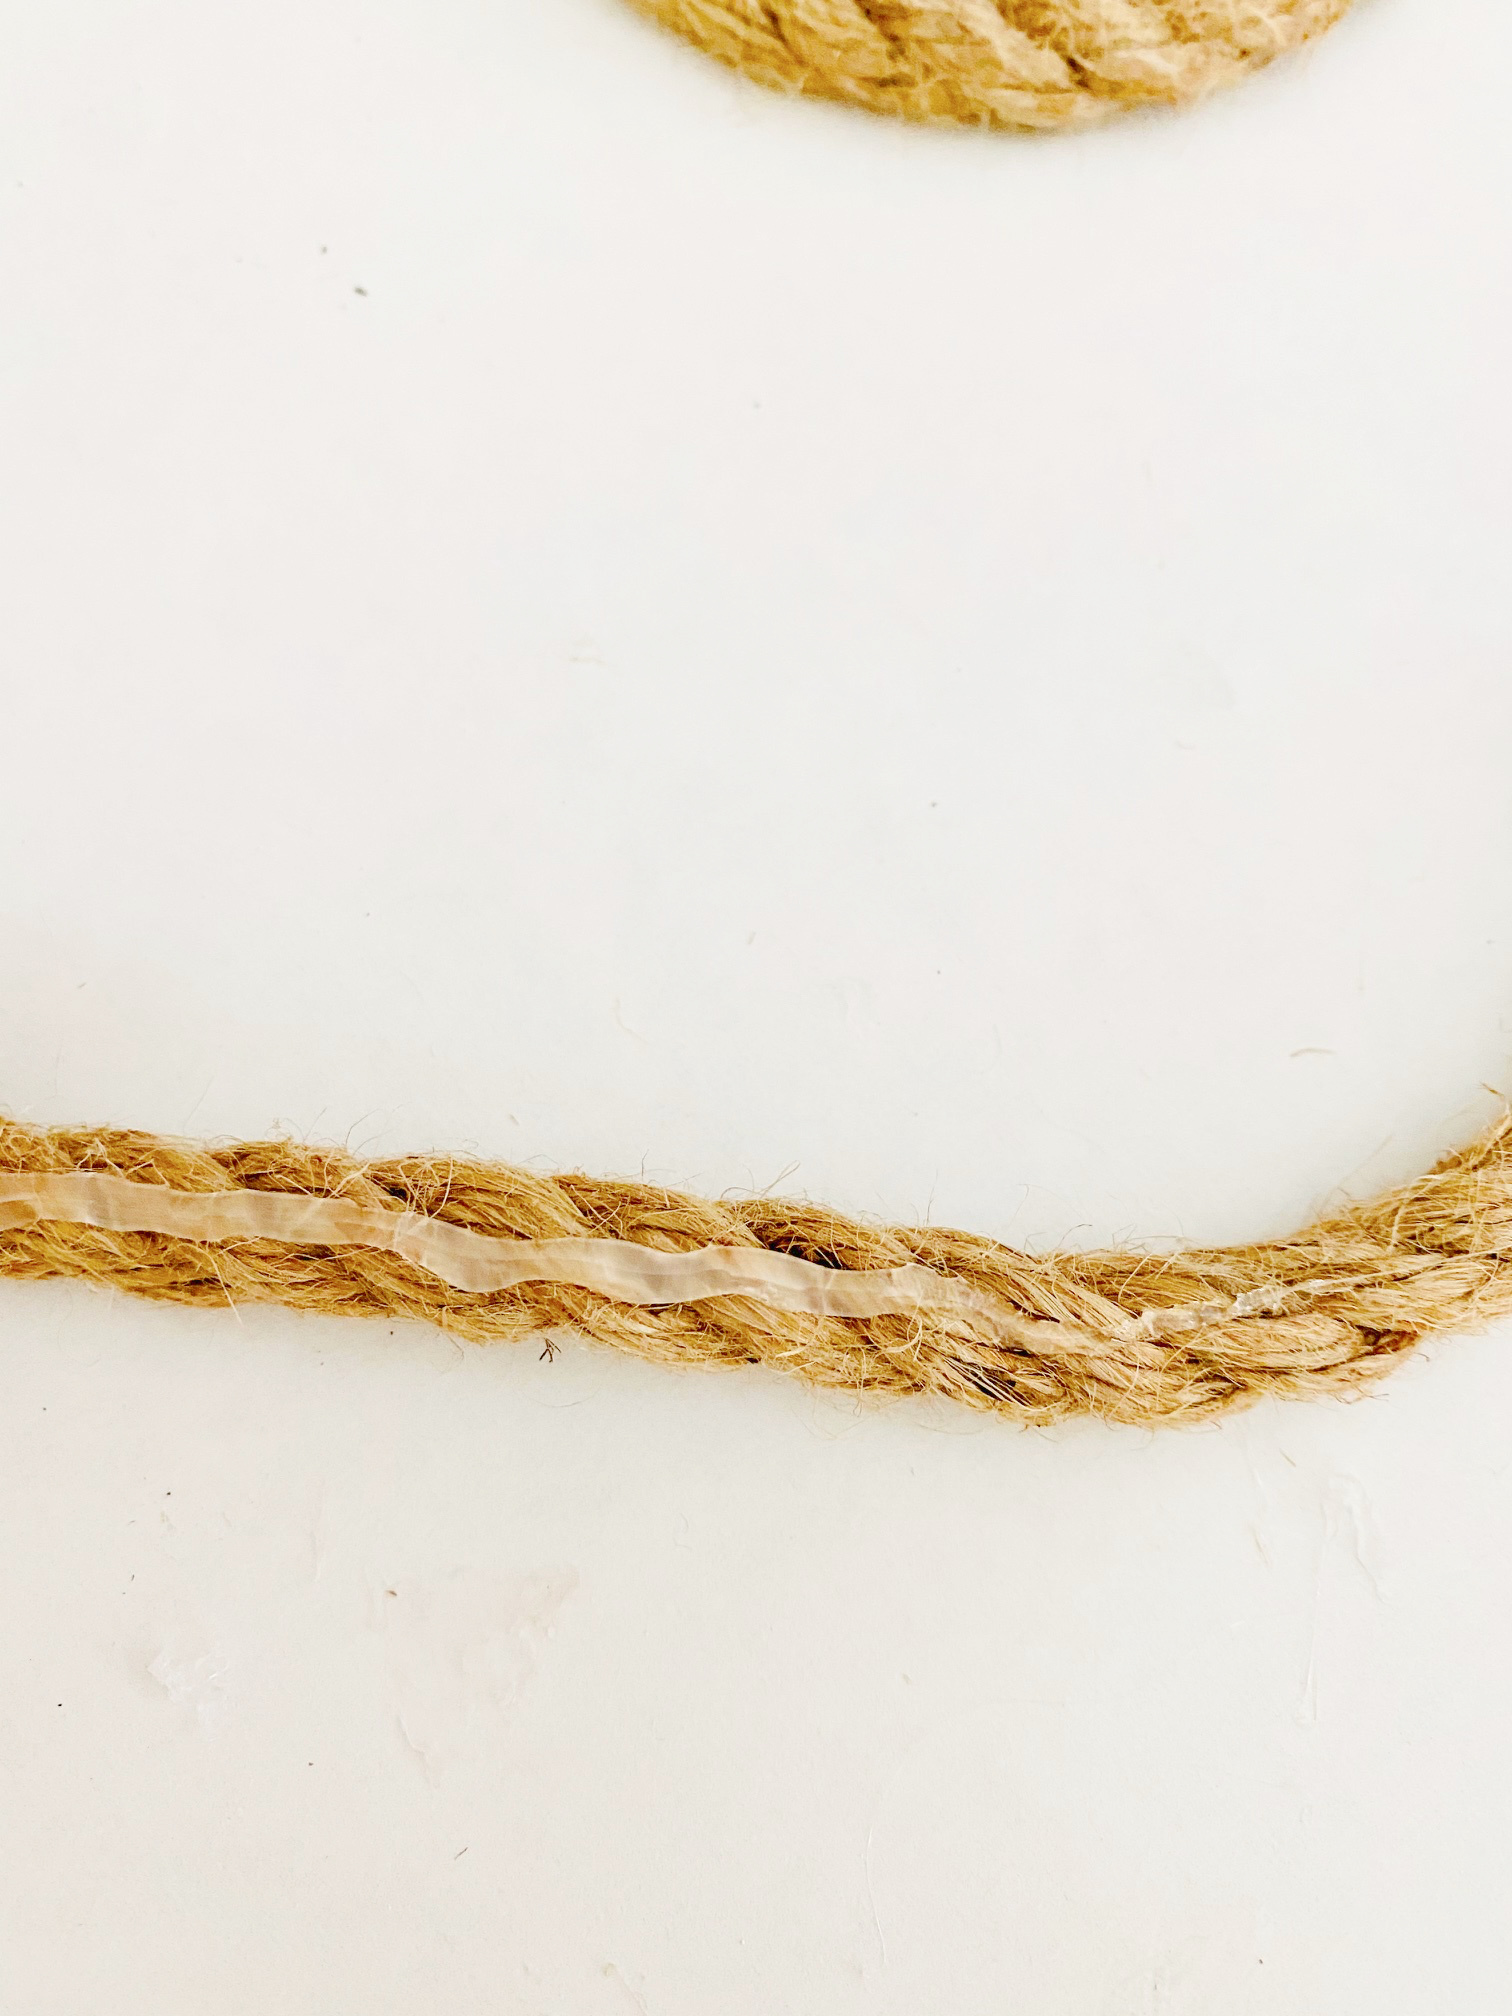 line of hot glue on a piece of jute rope